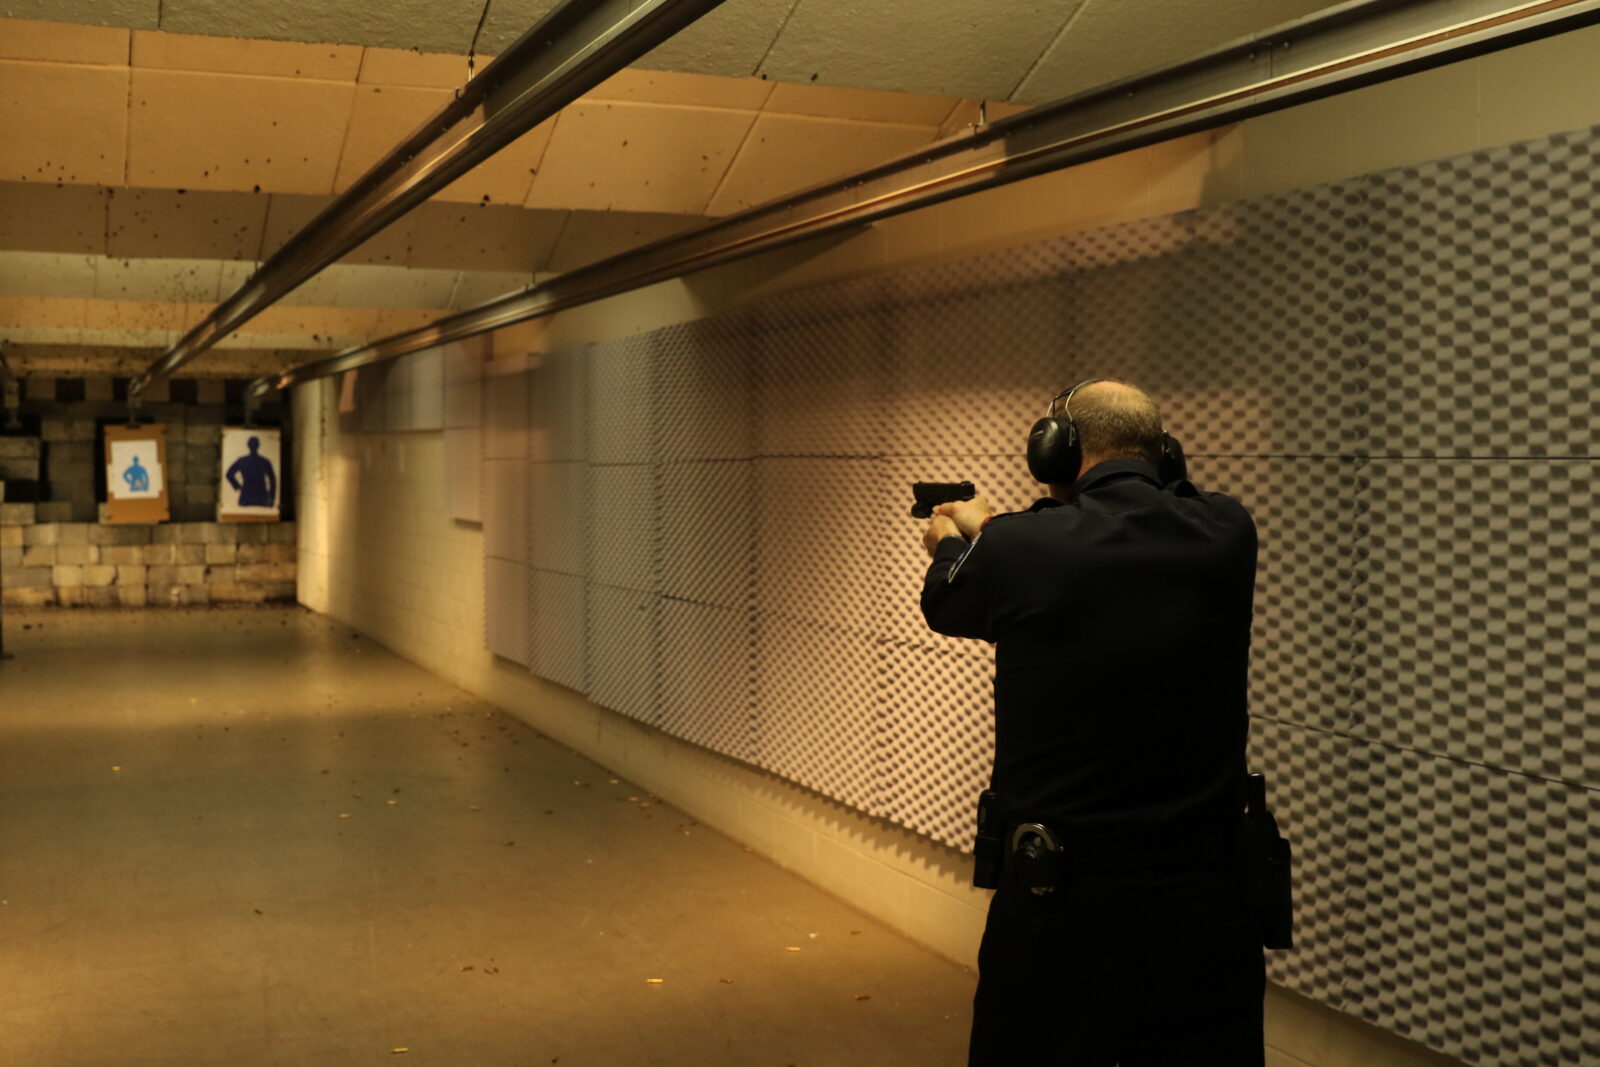 soundproofing a gun range for hearing protection